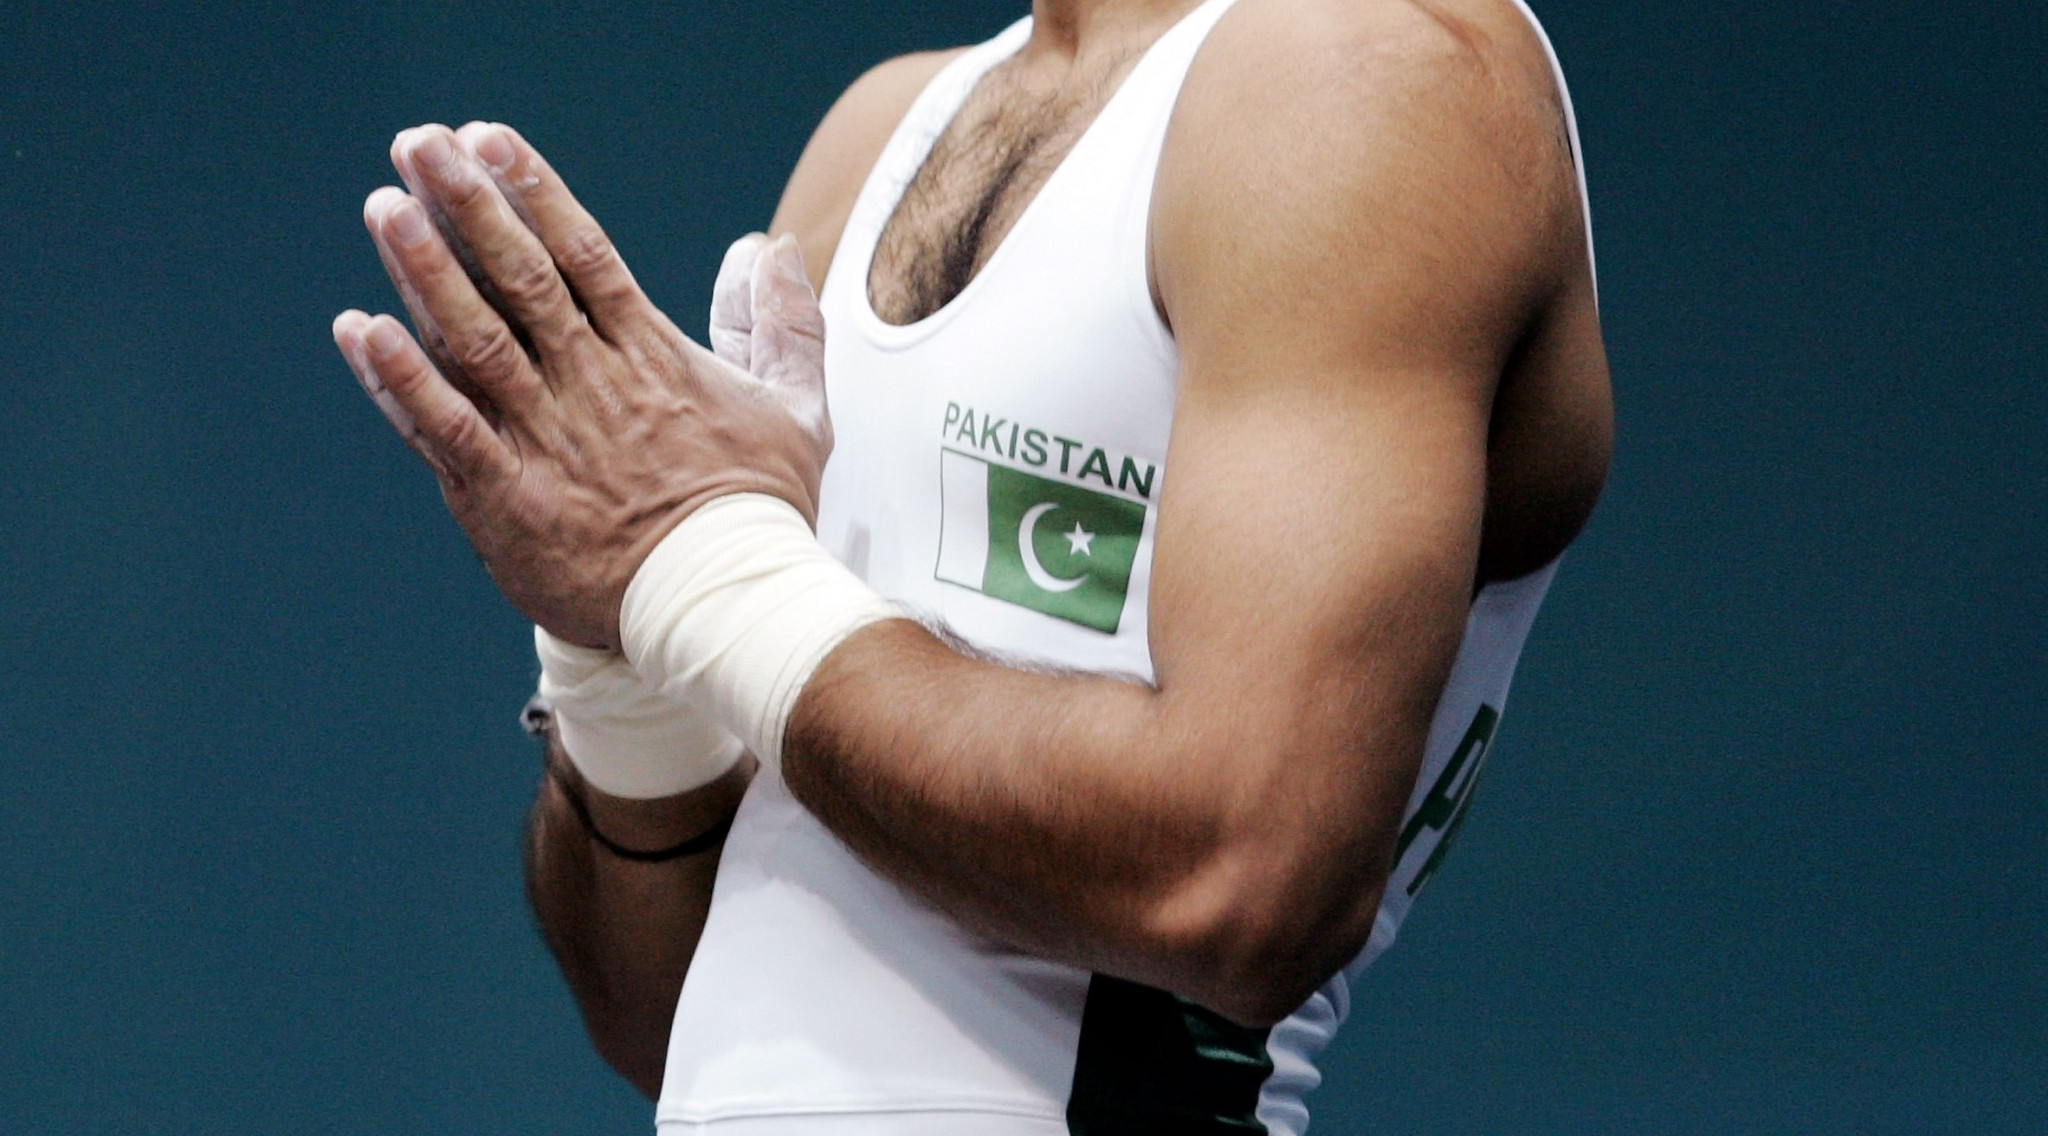 Pakistan weightlifting chief claims athletes were told not to provide anti-doping samples